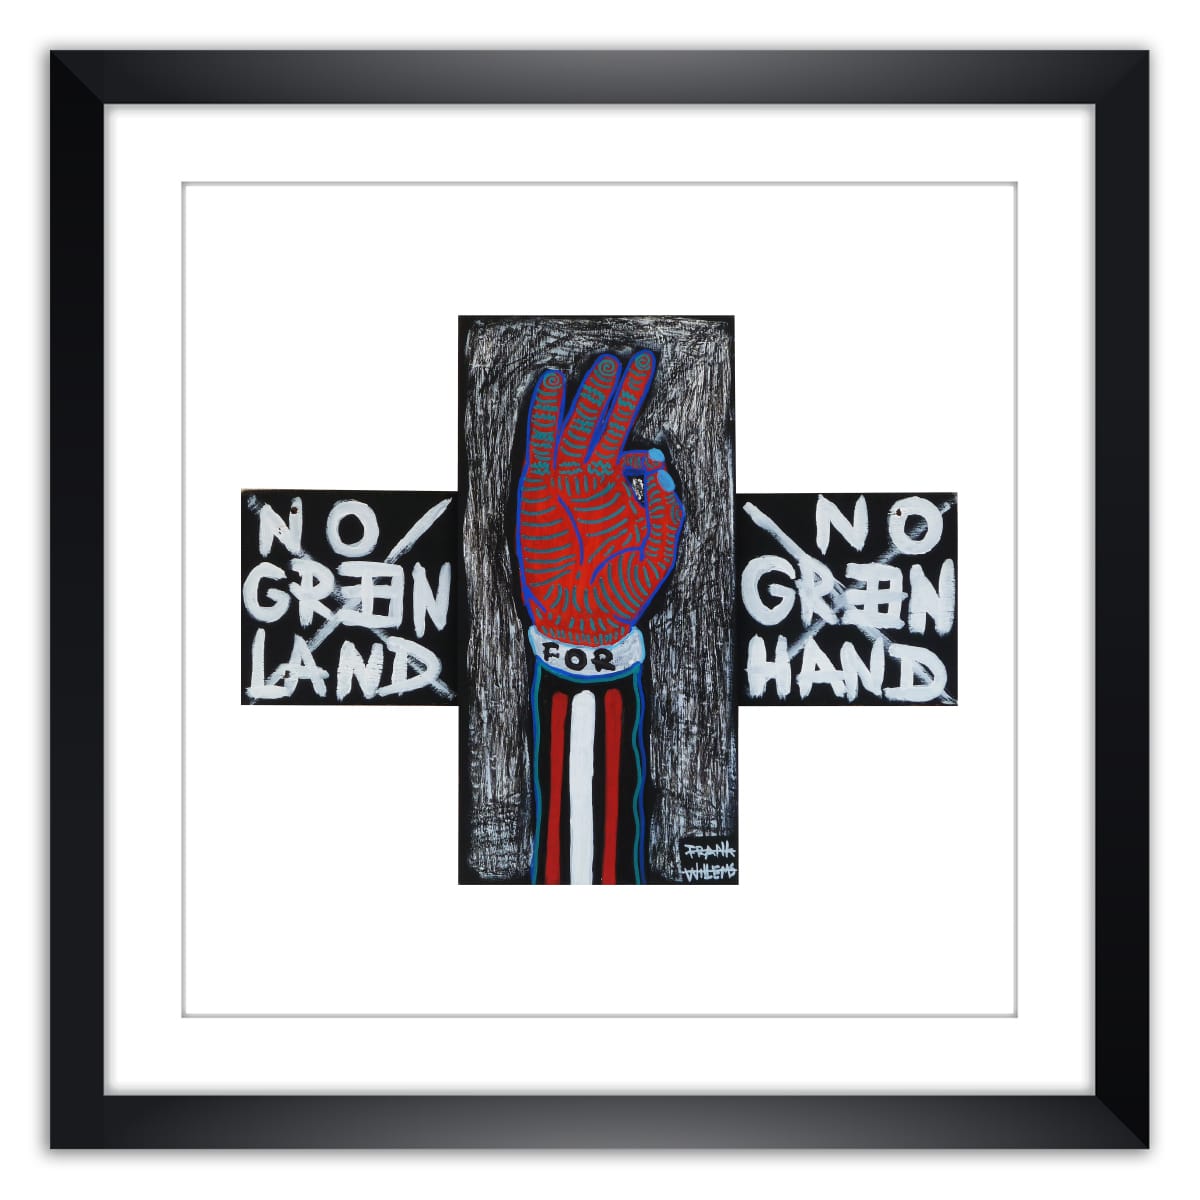 Limited prints - NO GREENLAND FOR NO GREENHAND framed - Frank Willems